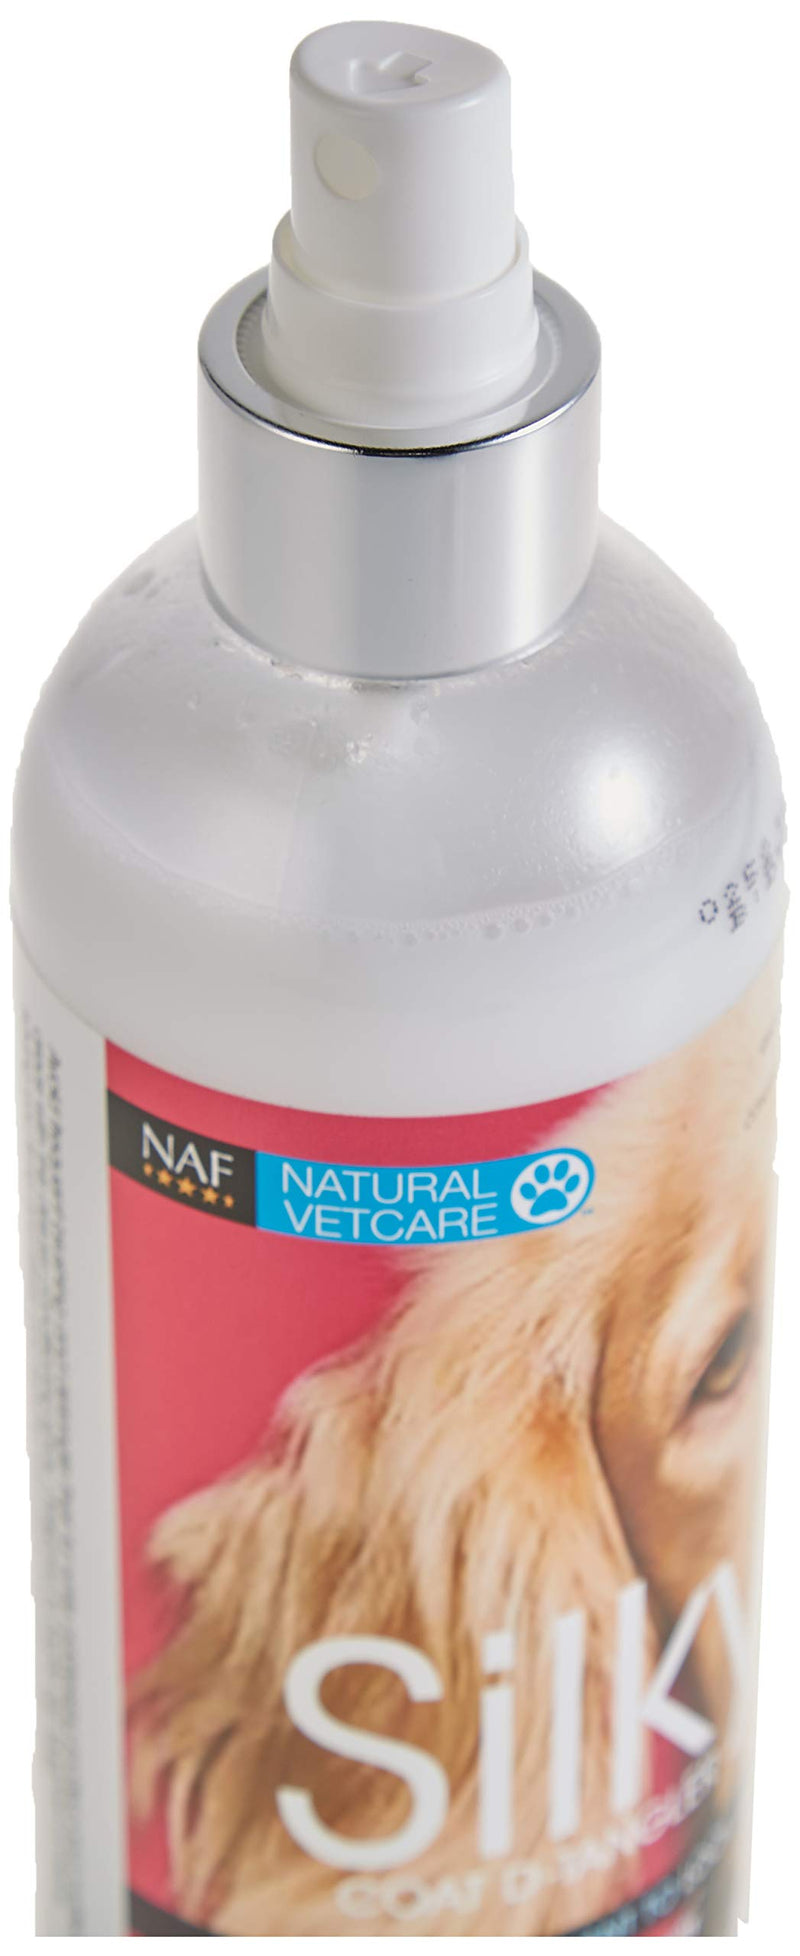 Natural VetCare Silky Detangling and Conditioning Grooming Spray for Dogs and Cats, 300 ml - PawsPlanet Australia